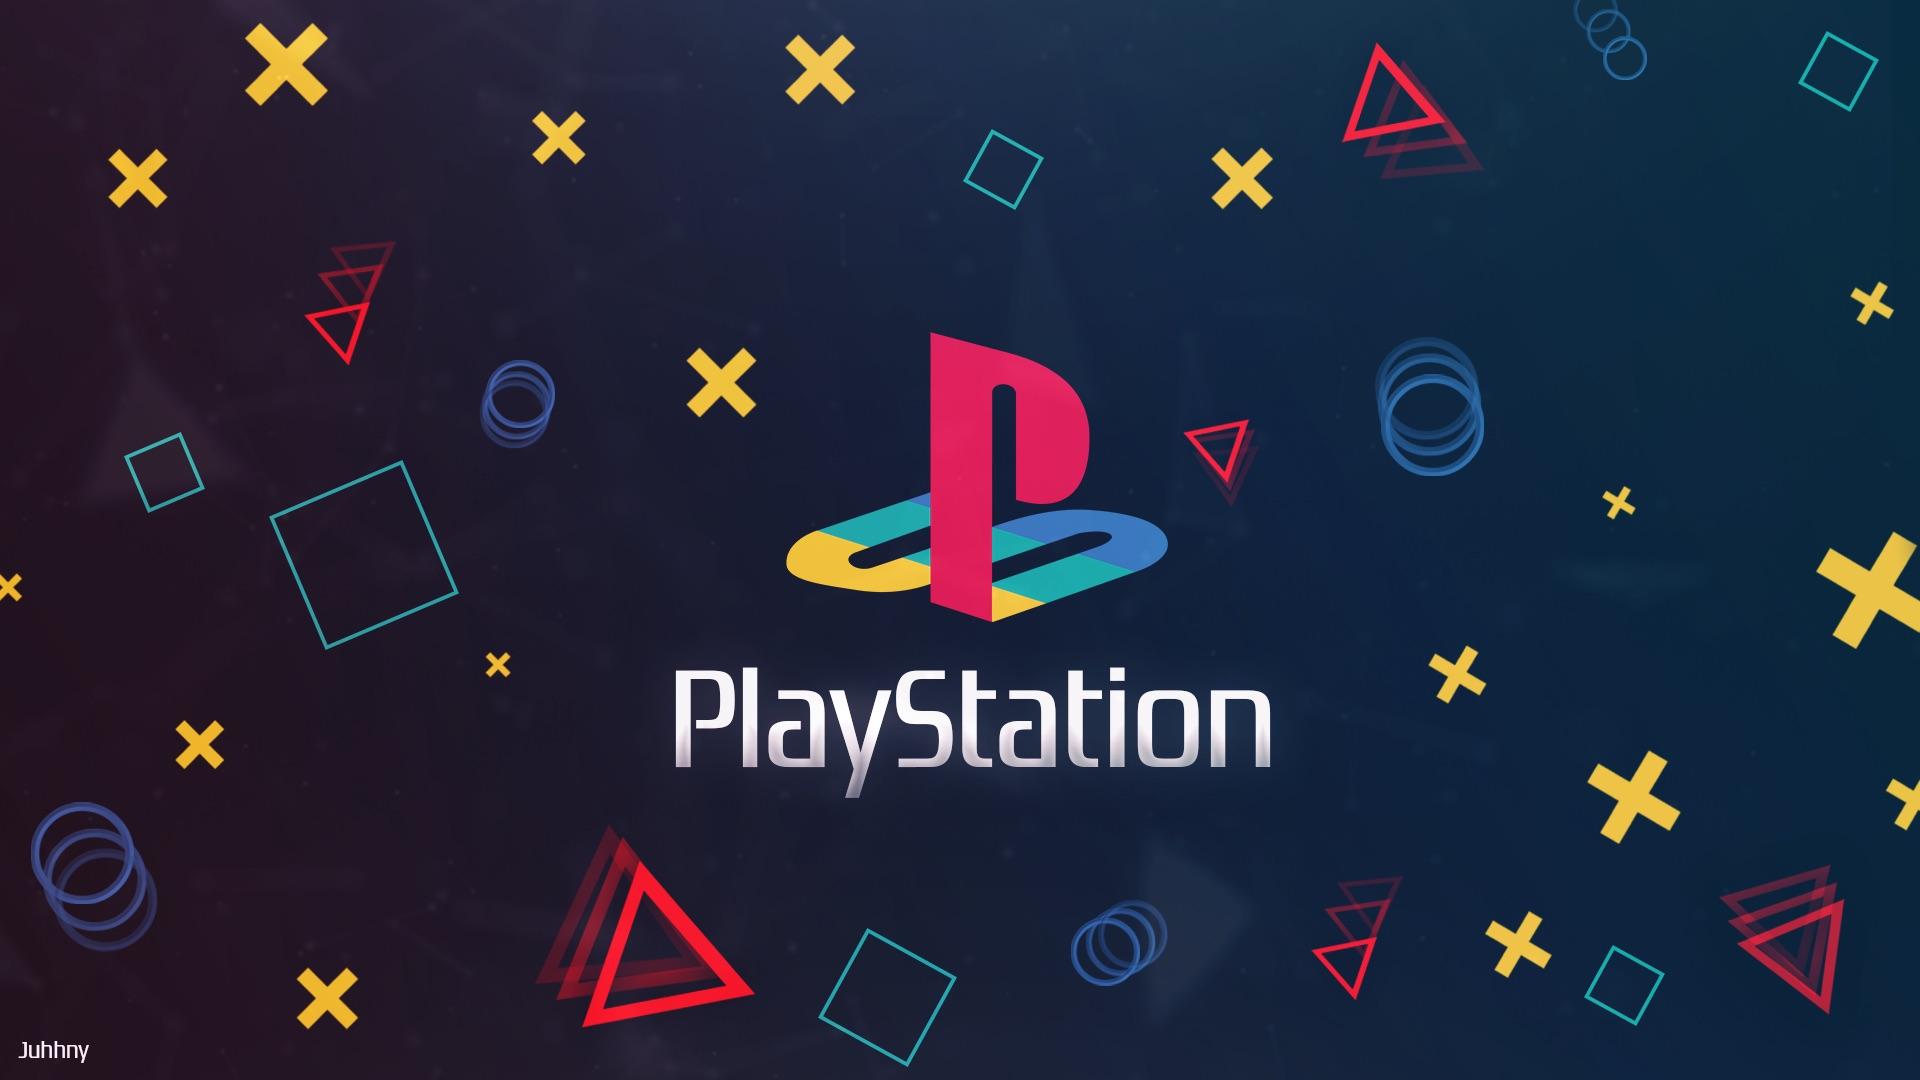 Playstation Wallpaper Design Hope You Guys Like It